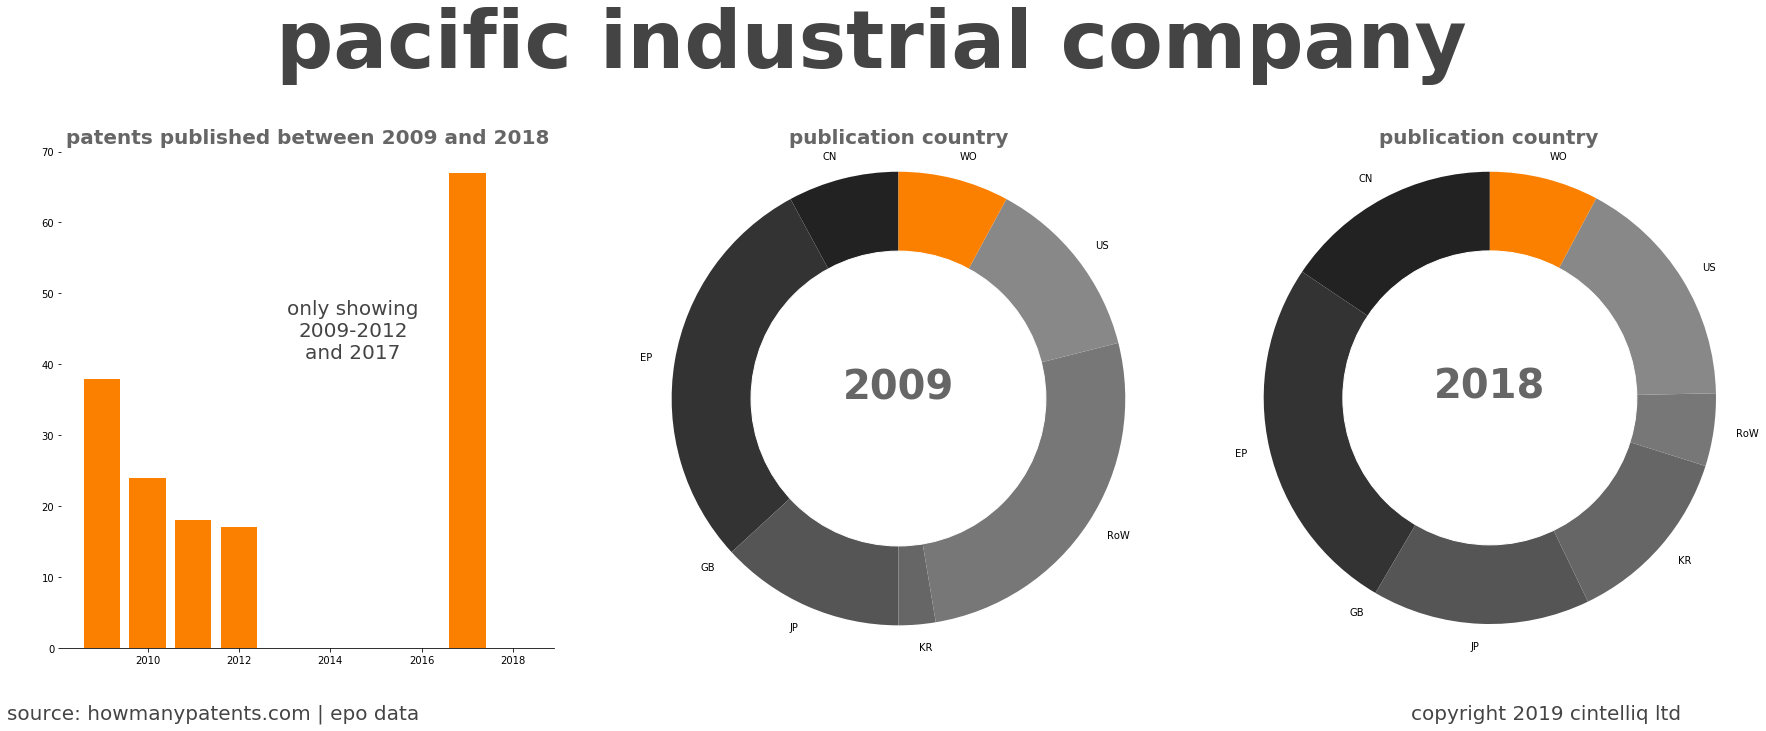 summary of patents for Pacific Industrial Company